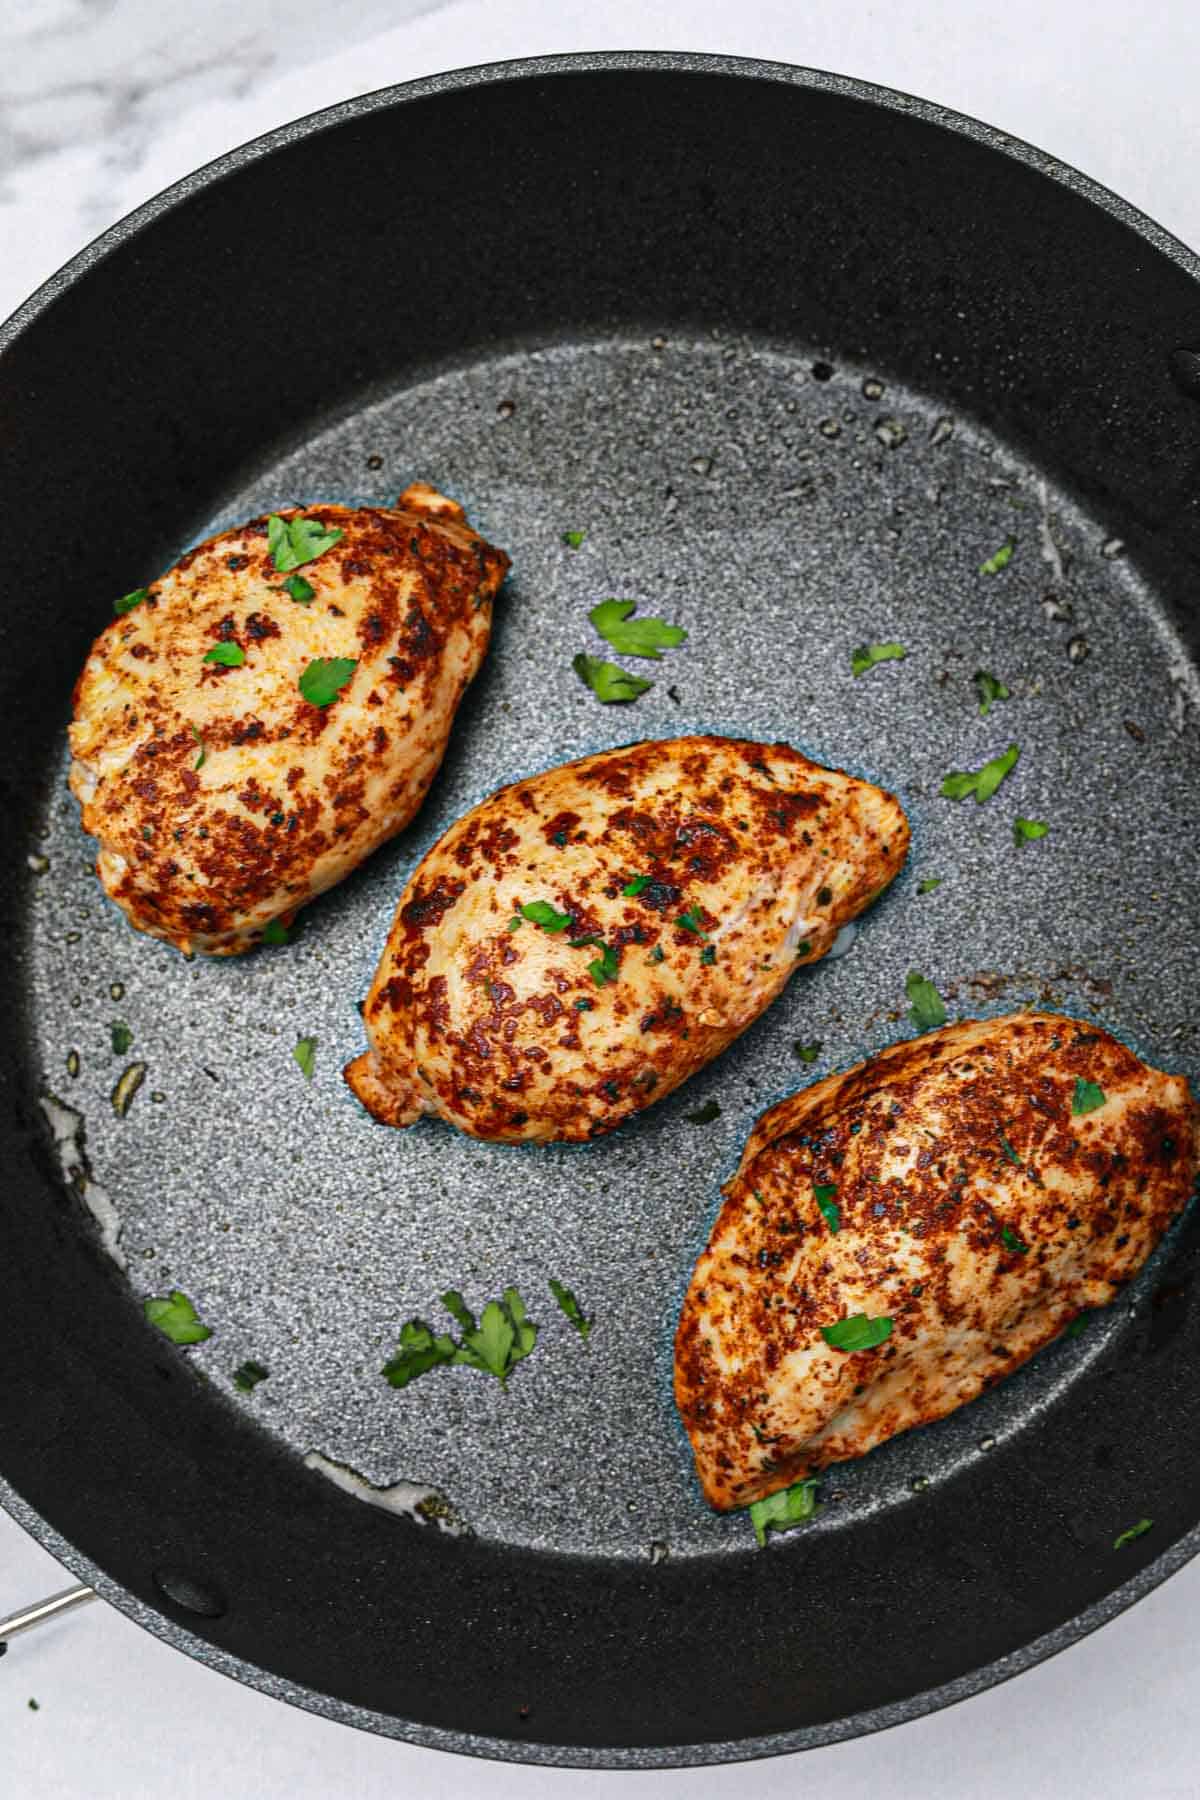 How to brown chicken - chicken breast in a pan.